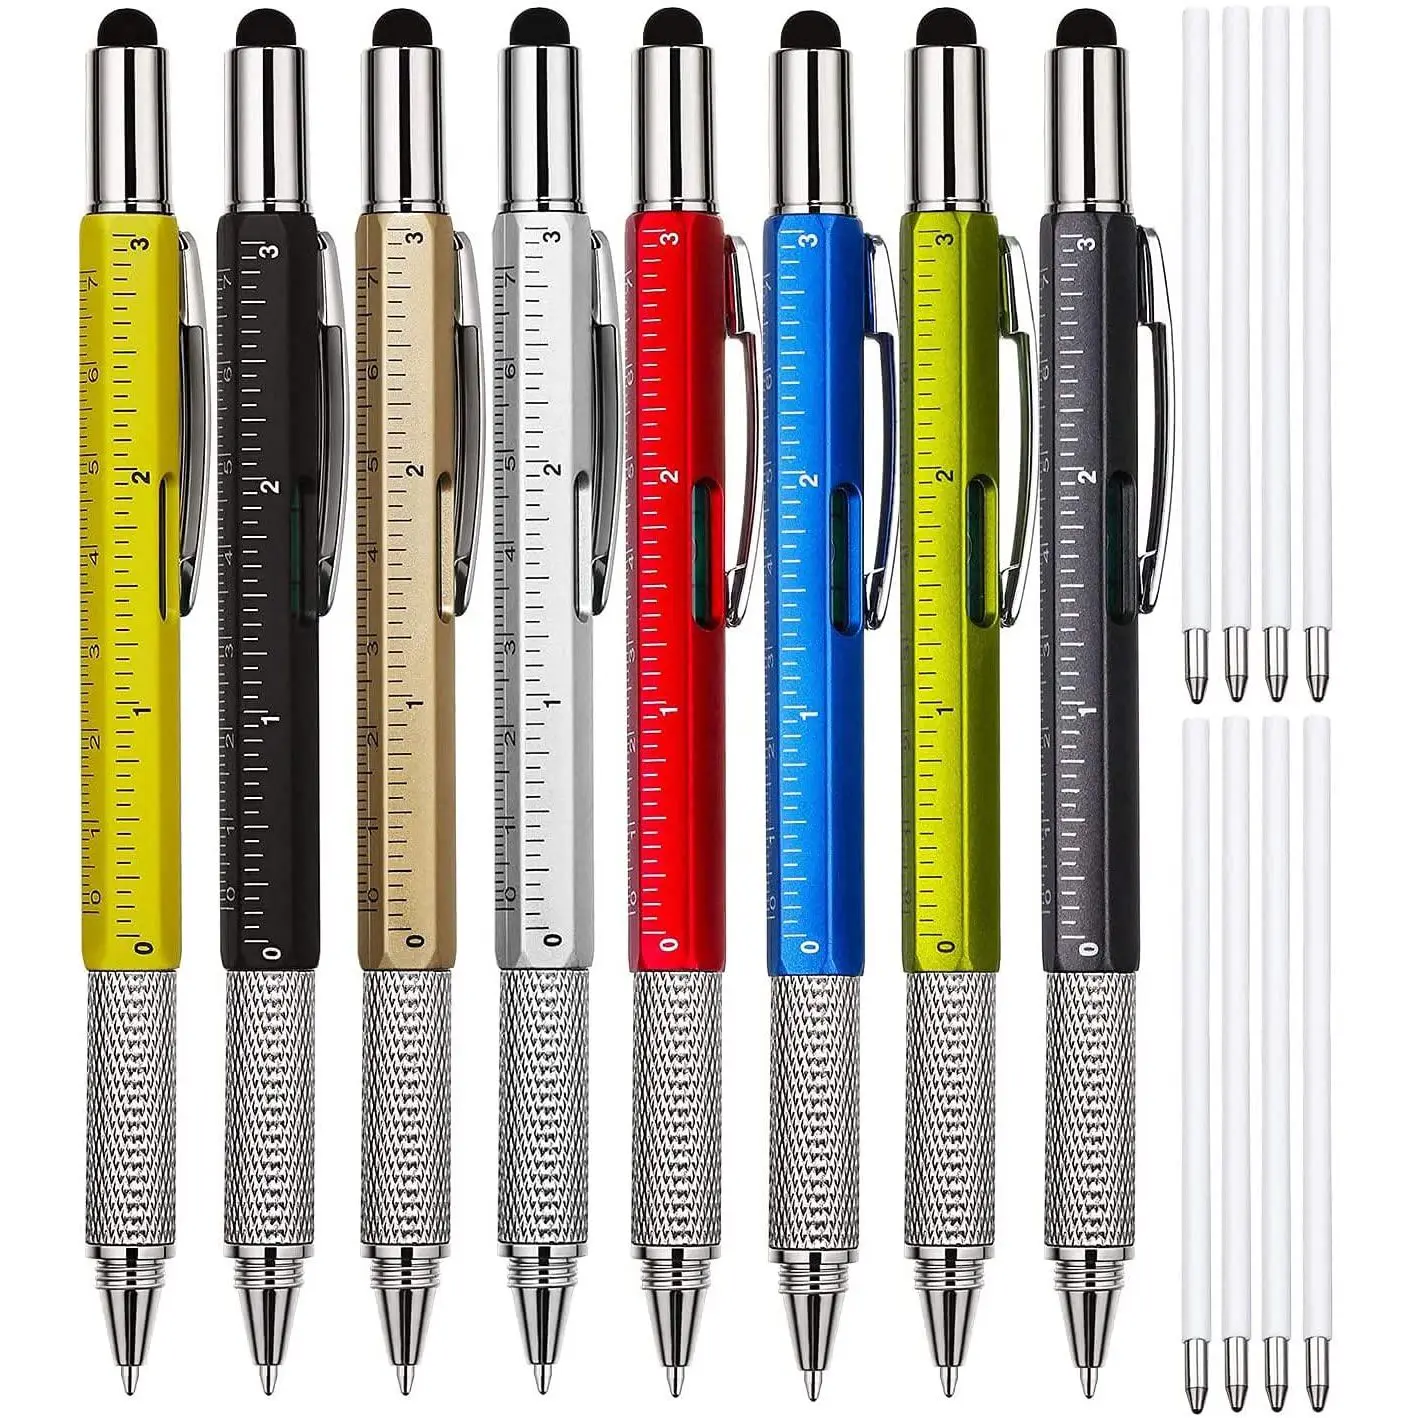 2022 multifunction 6 in 1 tool pen with ruler level Two-Head Screwdriver stylus ball pen